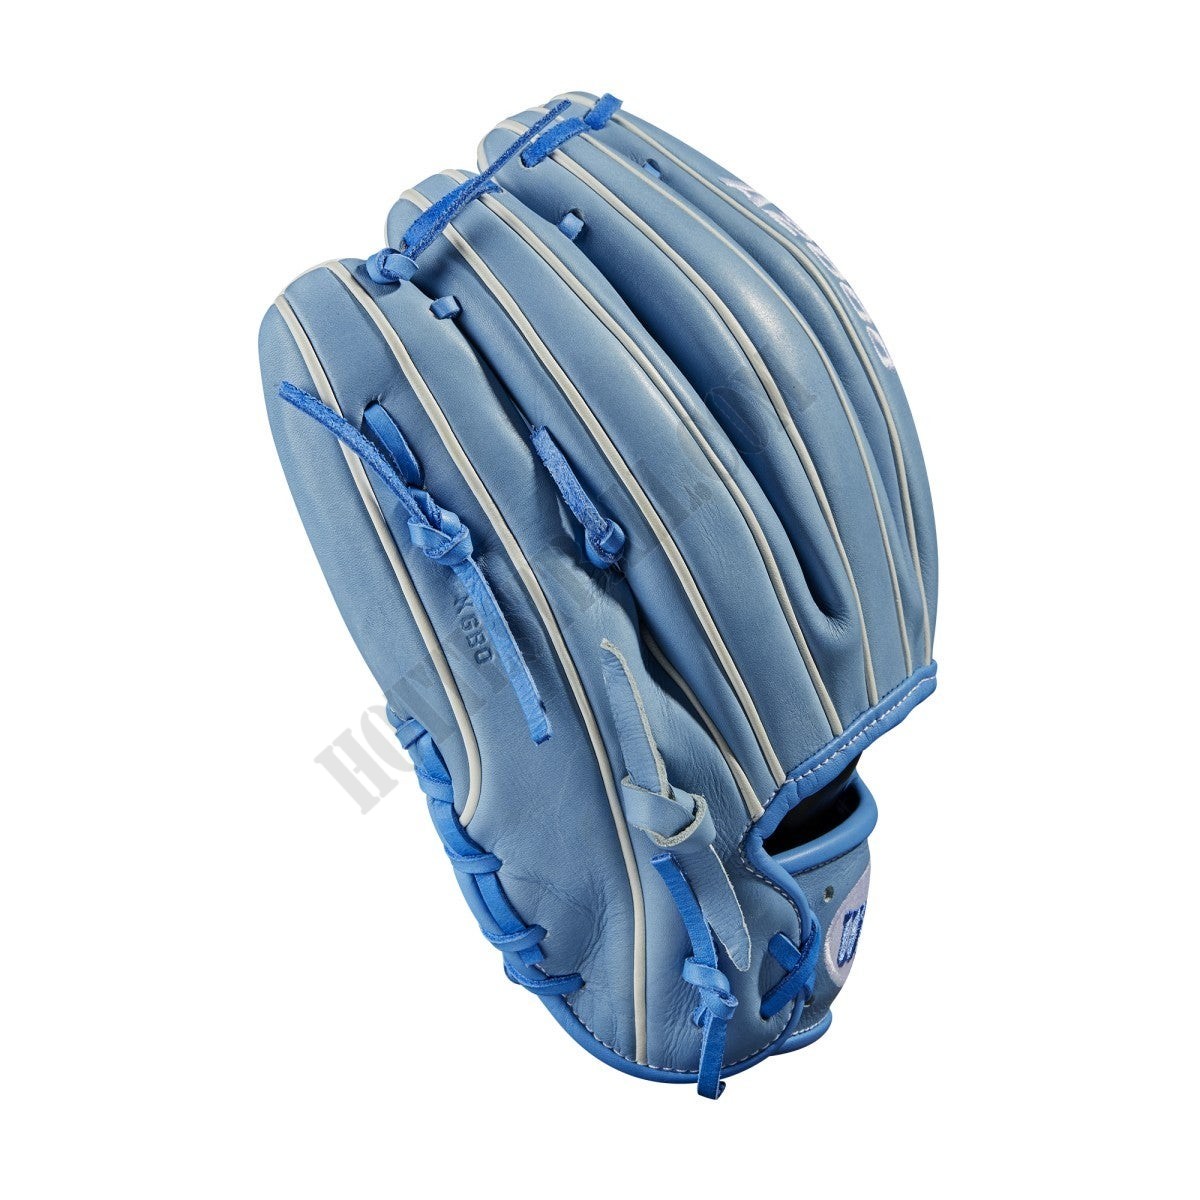 2020 Autism Speaks A2000 1786 11.5" Infield Baseball Glove - Limited Edition ● Wilson Promotions - -4